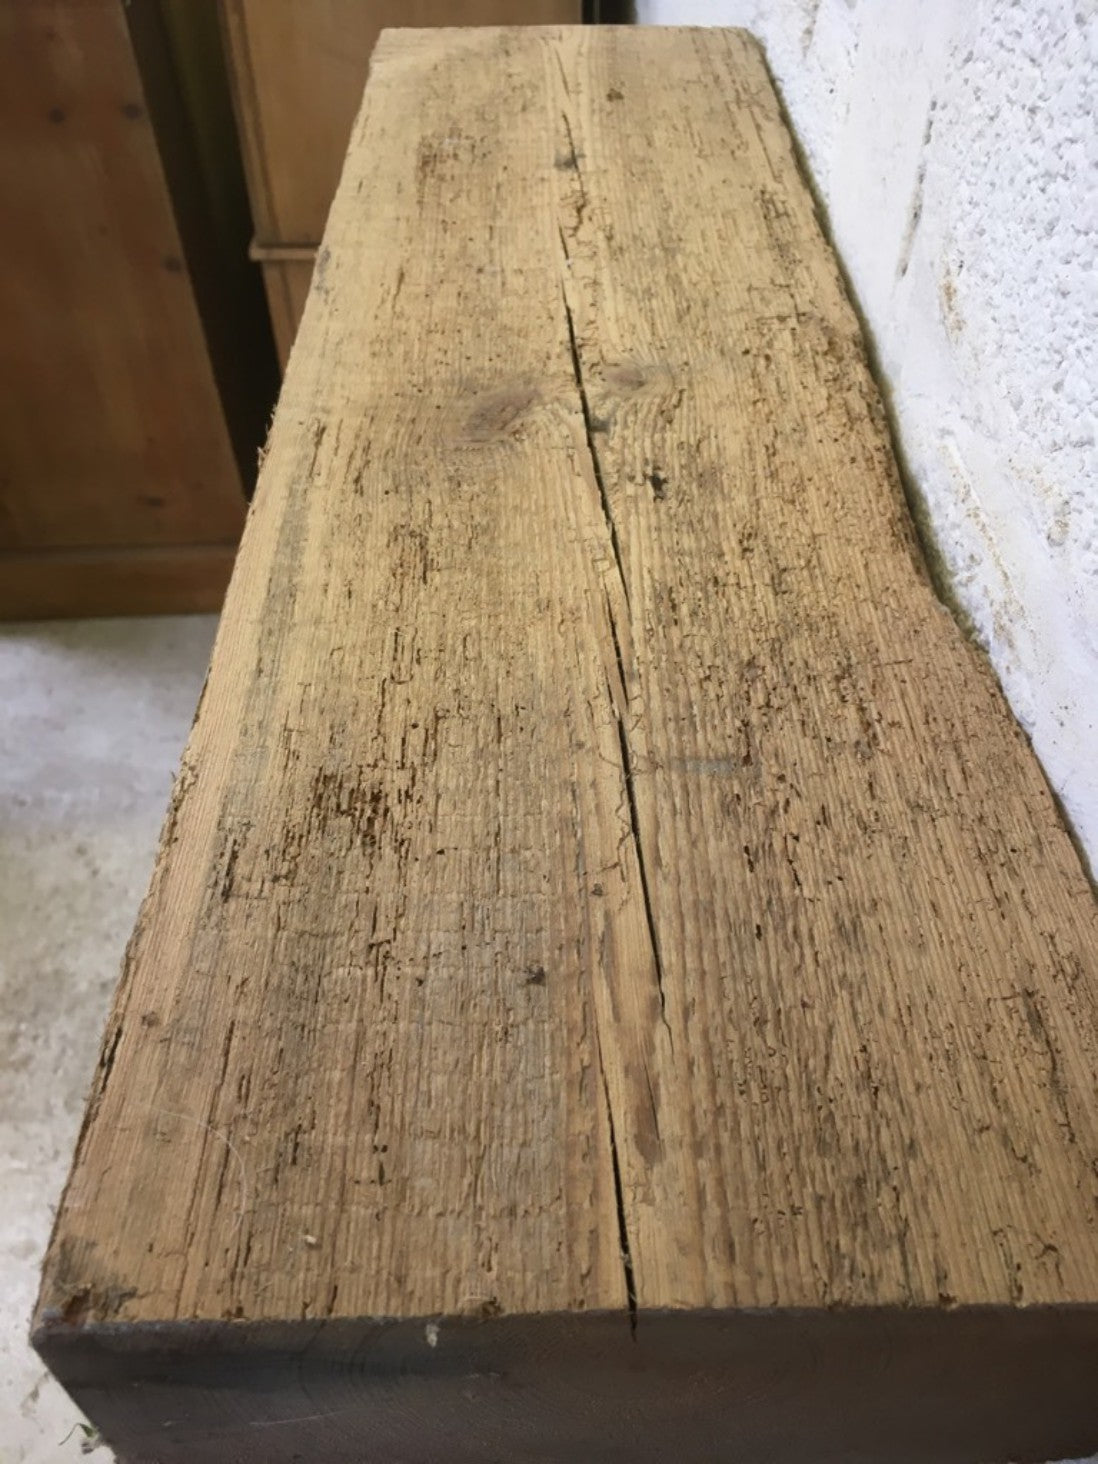 2ft Or 61cm By 6 7/8” By 2 7/8” Old Reclaimed Rustic Pine Mantel Shelf Wormy